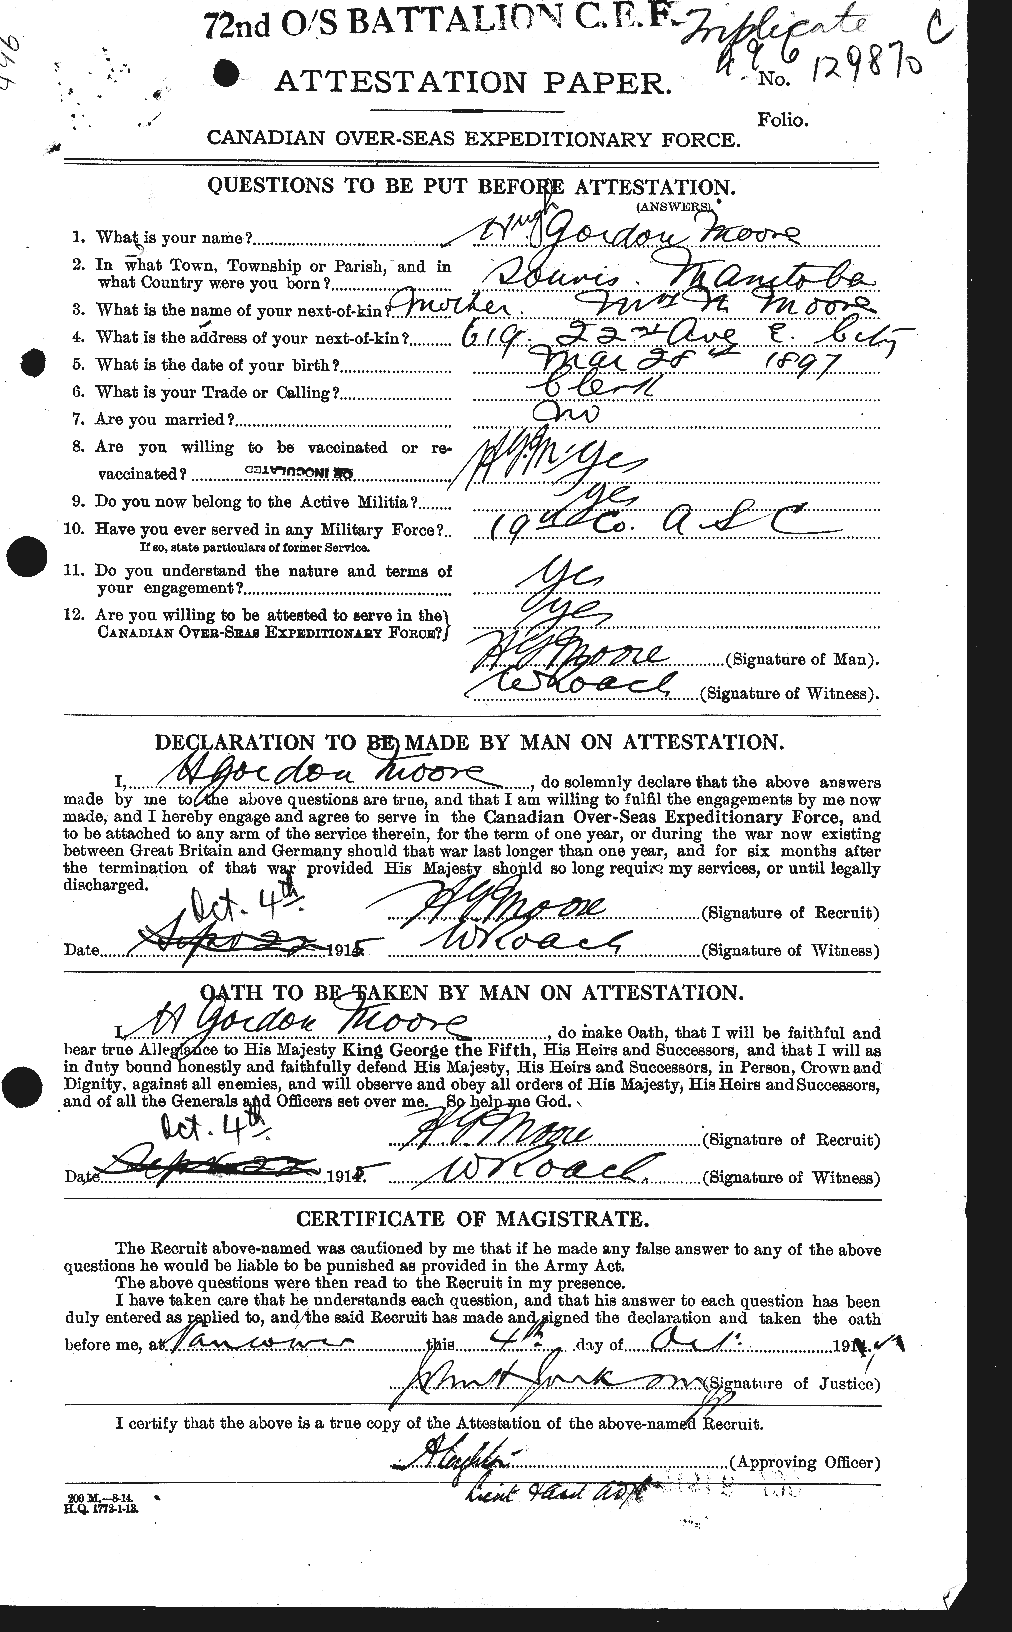 Personnel Records of the First World War - CEF 502151a